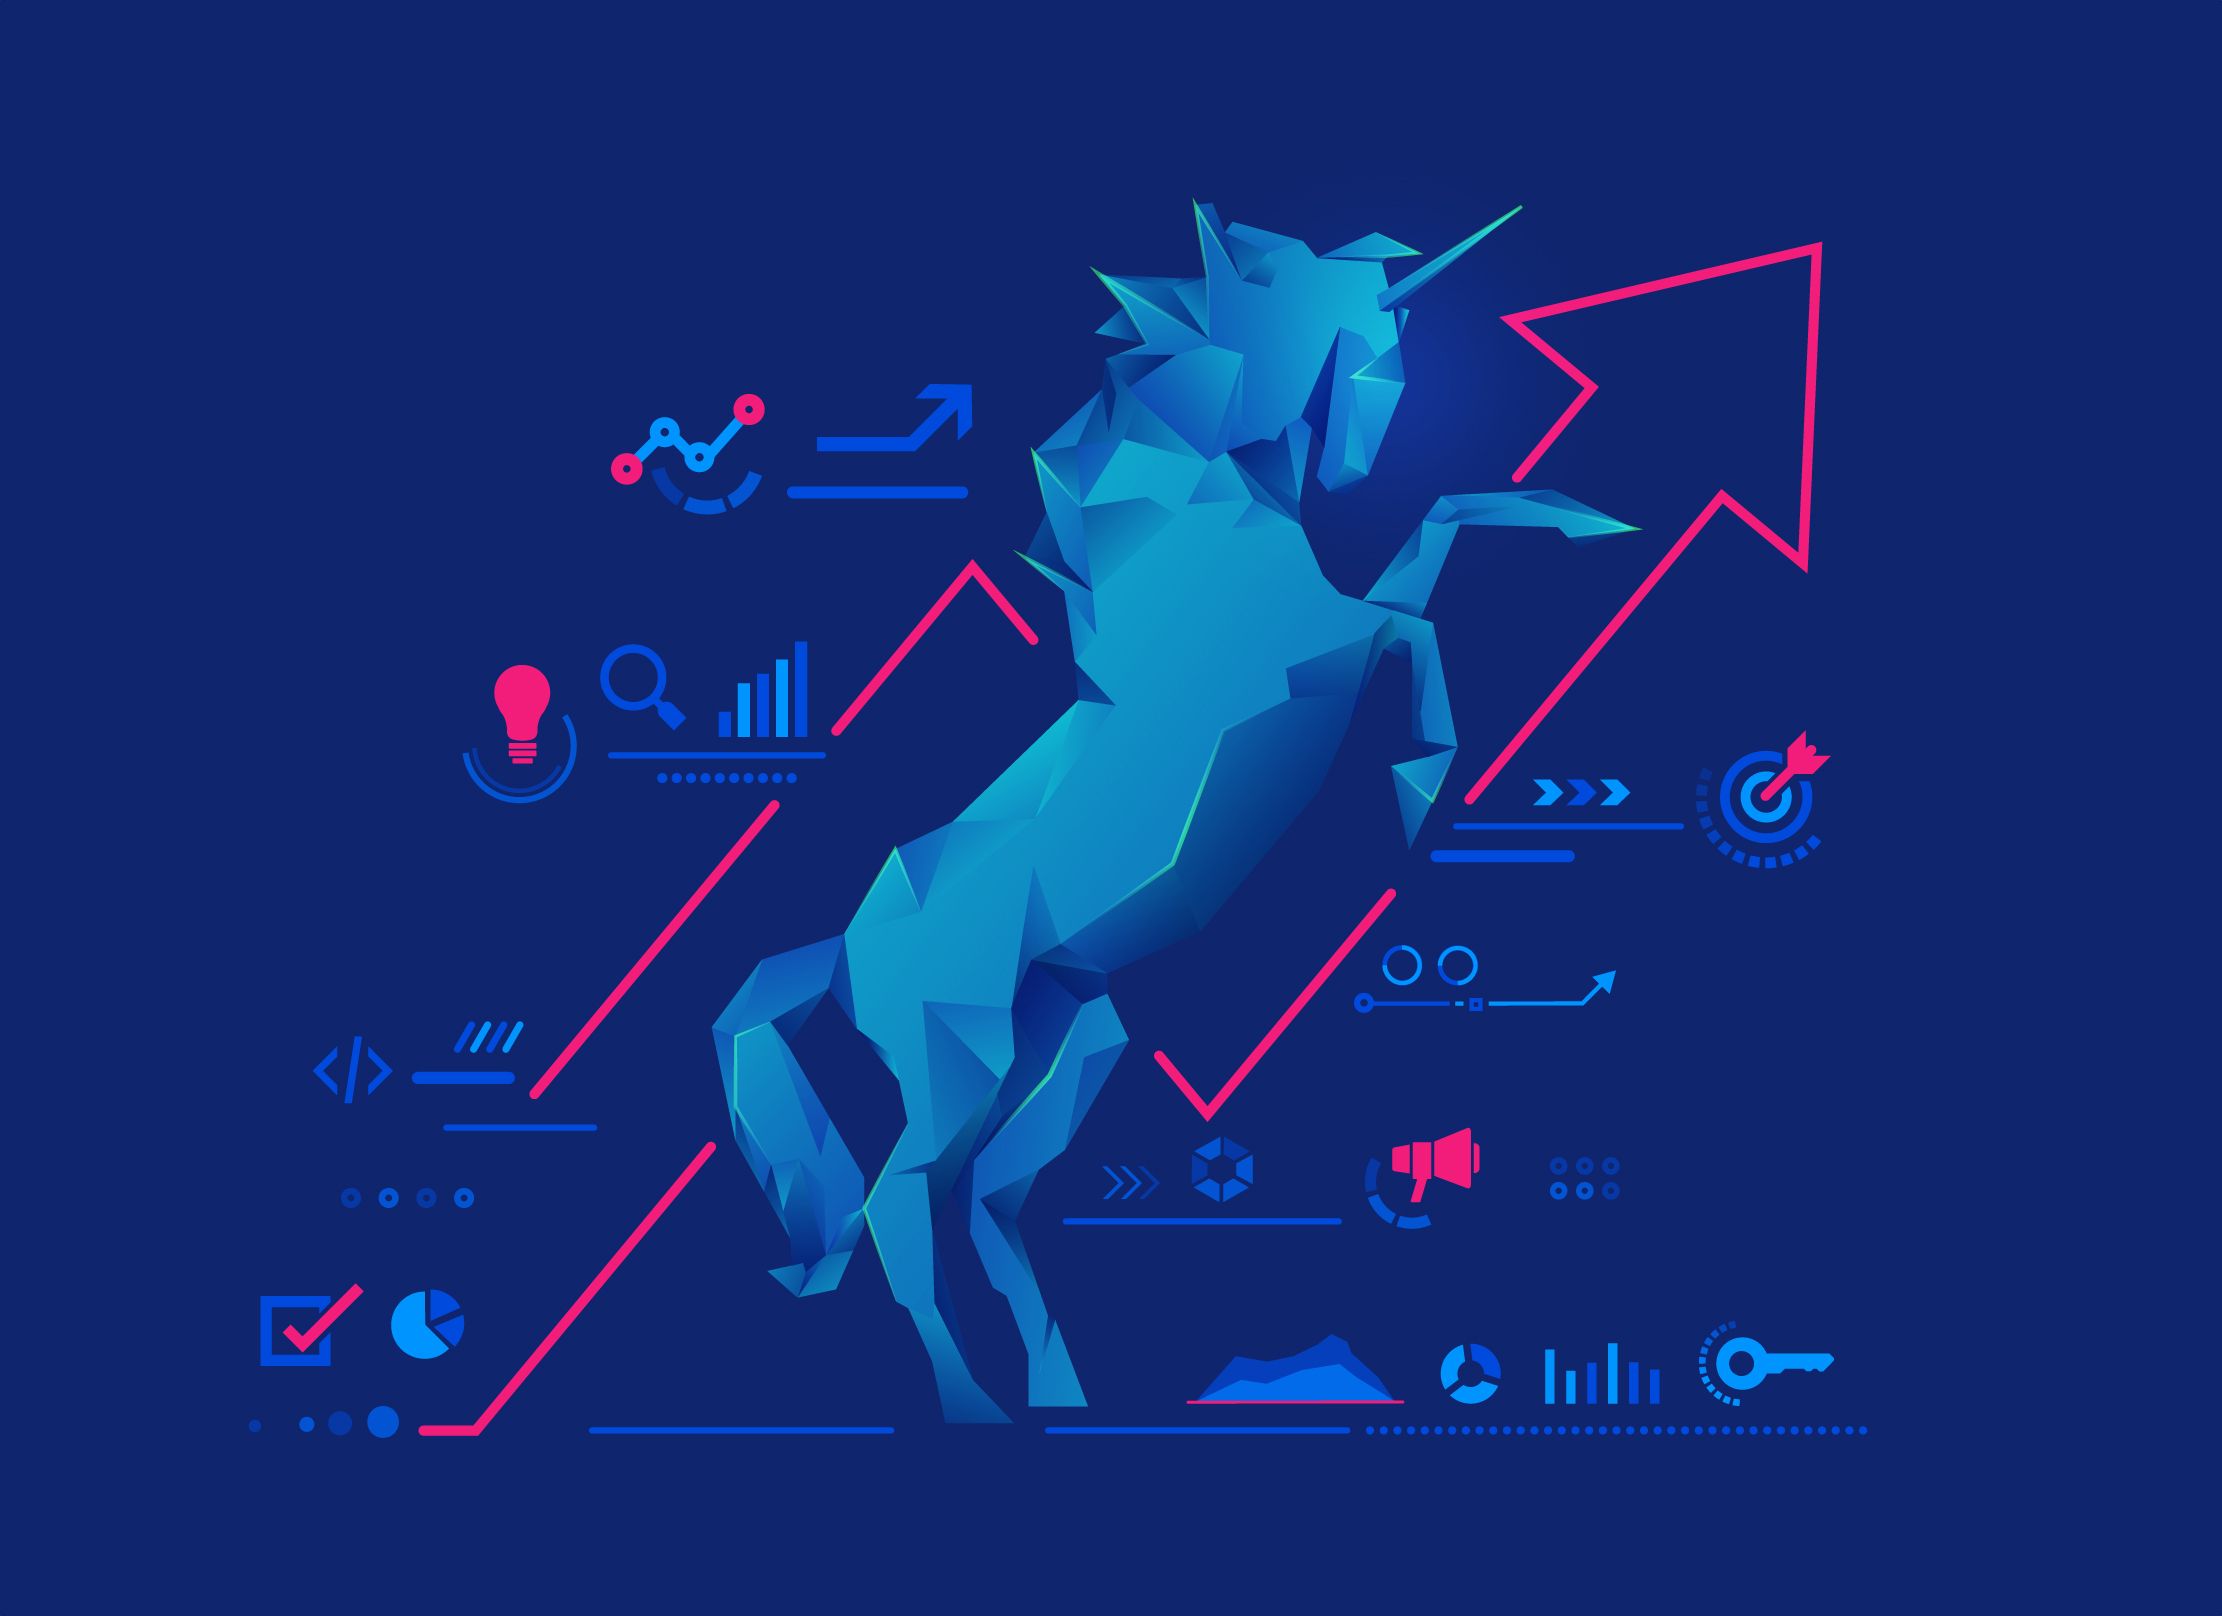 24 new unicorns in 2022, SaaS pips fintech: Report